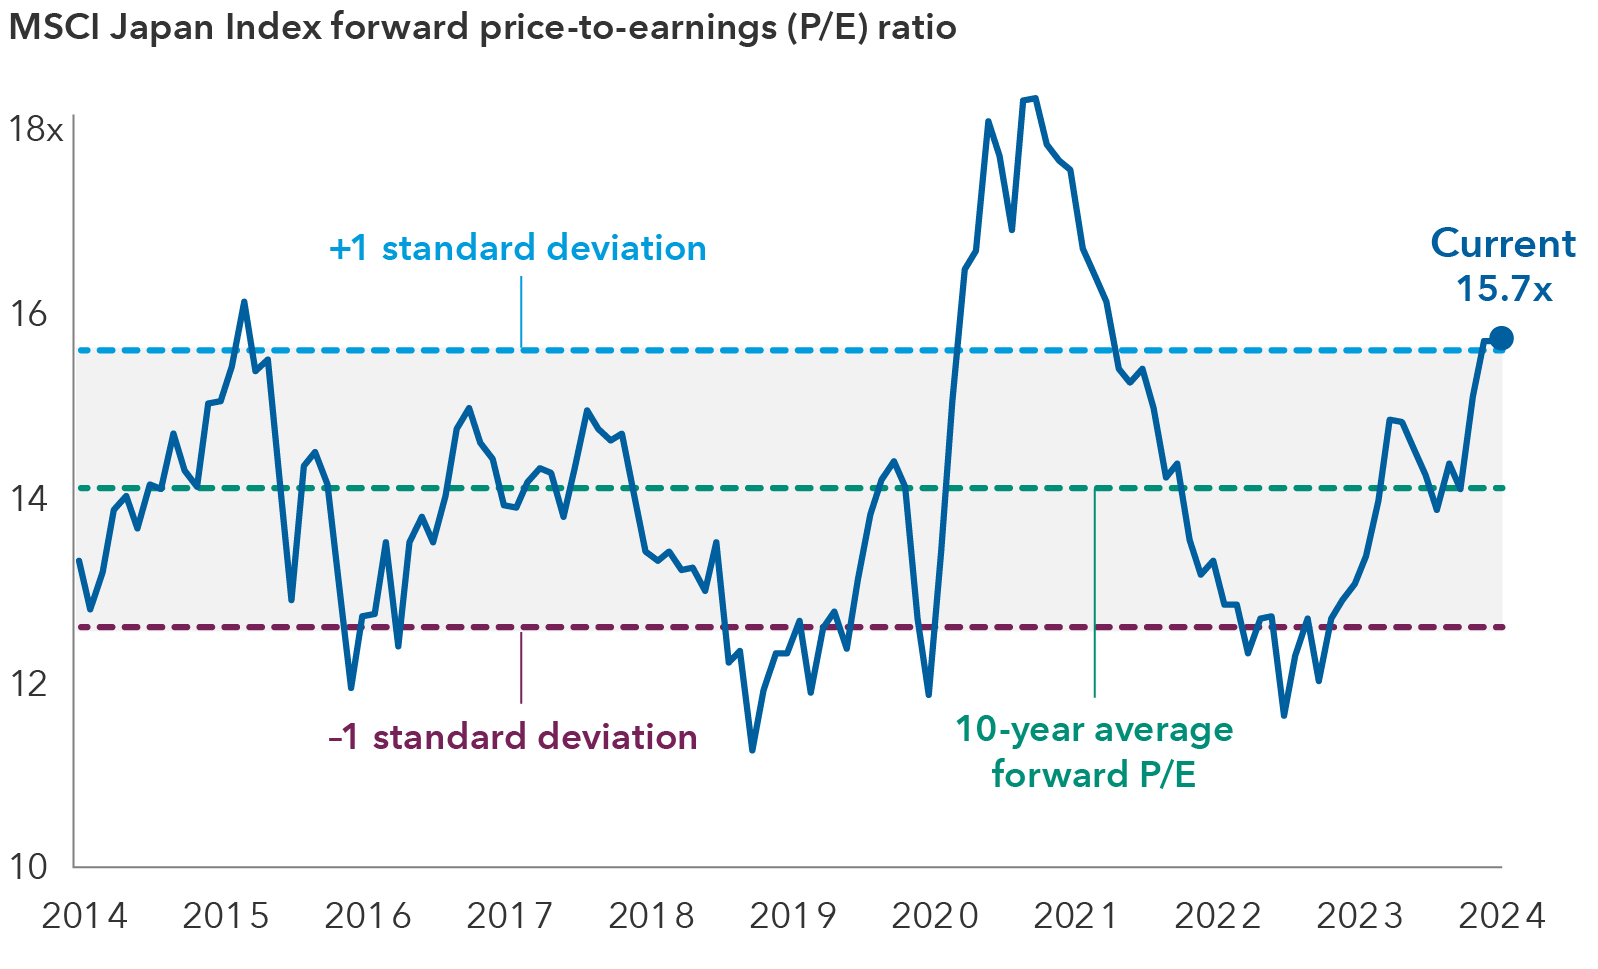 This line graph represents the MSCI Japan Index’s forward price-to-earnings (P/E) ratio from 2014 to 2024. The y-axis represents the forward P/E ratio, ranging from 10x to 18x. The x-axis lists the years from 2014 to 2024. The graph shows a fluctuating blue line that represents the MSCI Japan Index’s forward P/E ratio over time. The current P/E value is 15.7 times earnings. For the 10-year period, it largely stayed within the range of 12 to 16 times earnings with fluctuations. Notably, there is a significant peak around the year 2021 to 18 times earnings, followed by a significant drop to 12 times earnings, and then a steady increase thereafter. In addition to the solid line, there are two dashed lines on the chart. These lines represent the 10-year average forward P/E in the center and its +1 (upper) and –1 (lower) standard deviation. The lines help gauge the deviation from the average and provide insights into market valuation. 